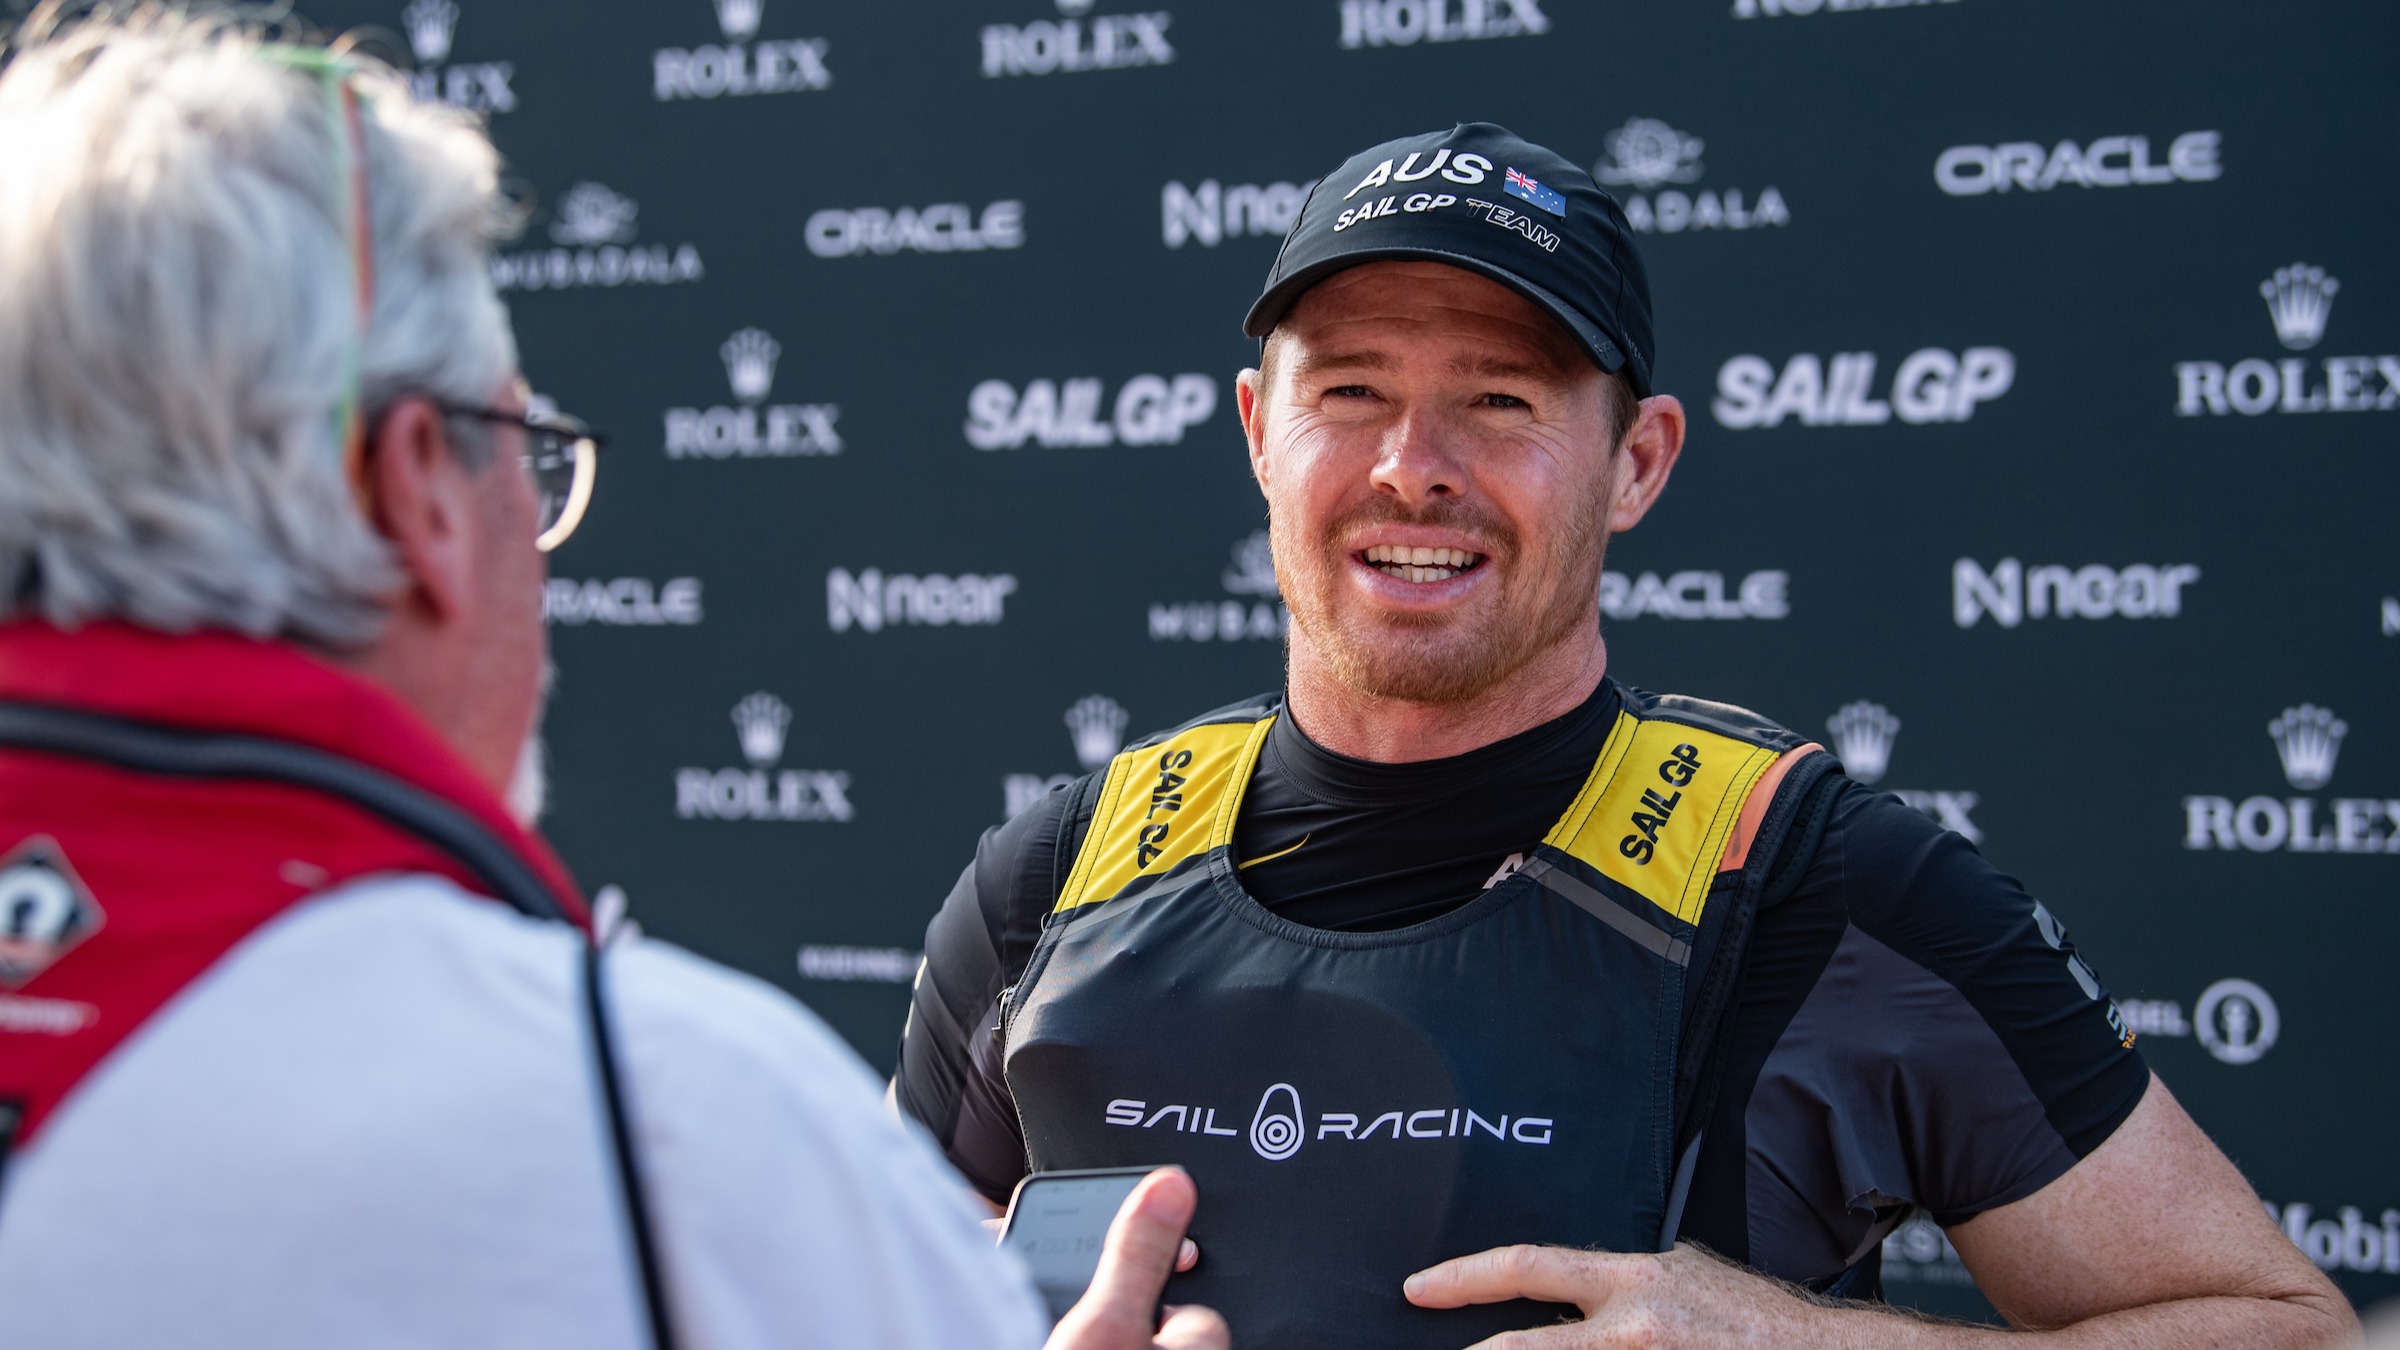 Season 4 // United States Sail Grand Prix Chicago // Tom Slingsby in mixed zone